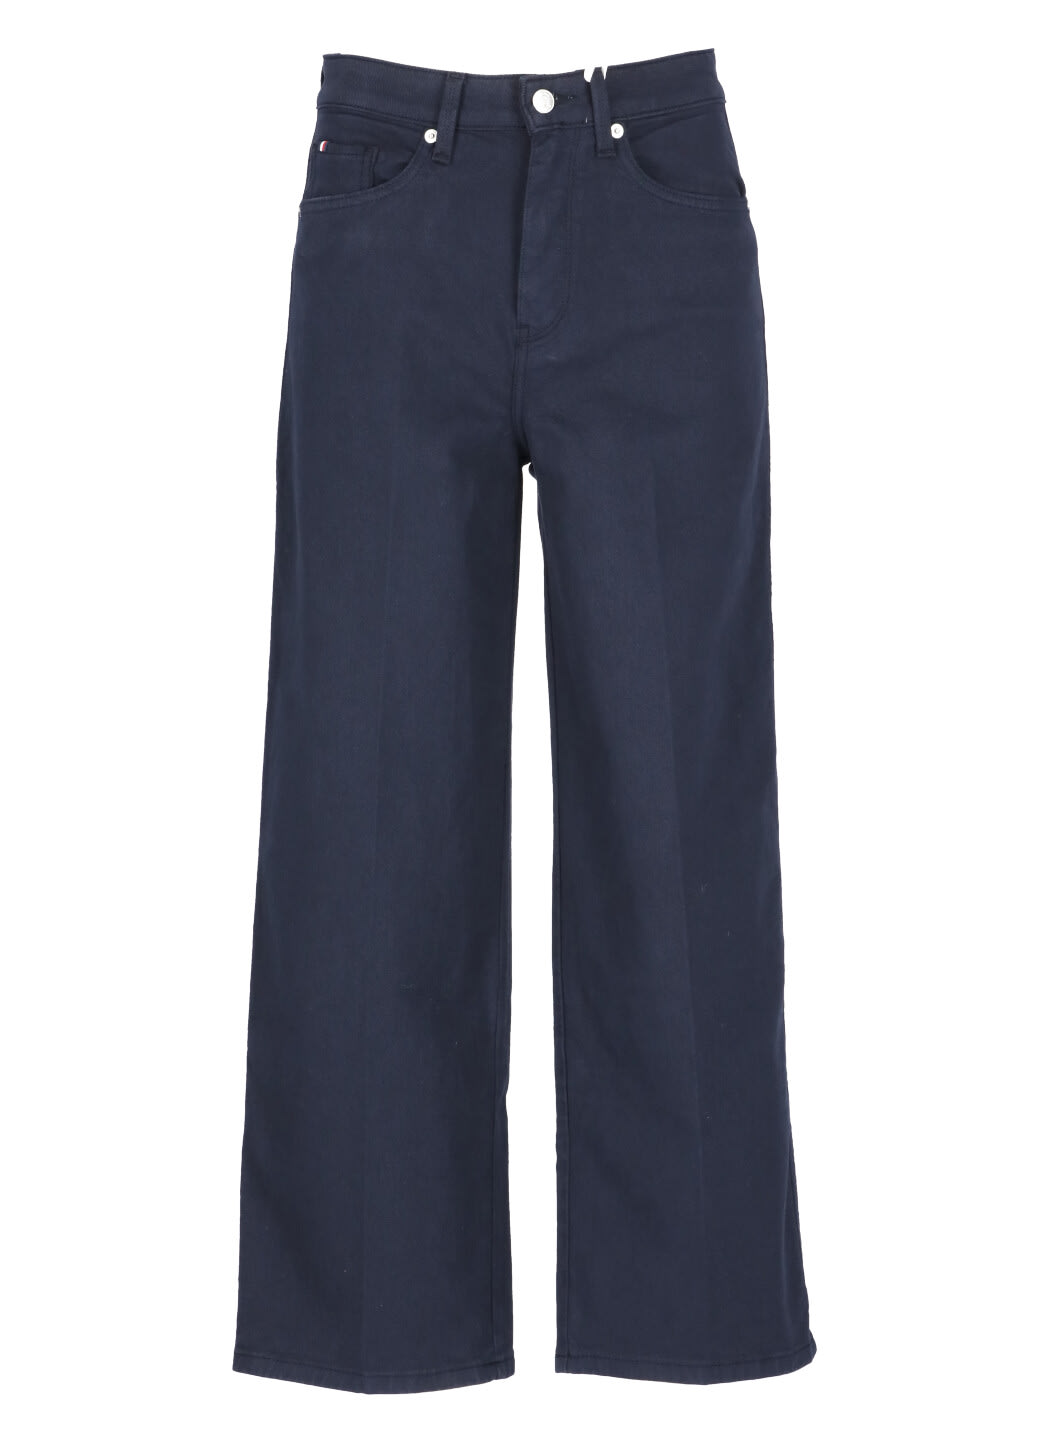 Tommy Hilfiger Cotton Twill Trouser